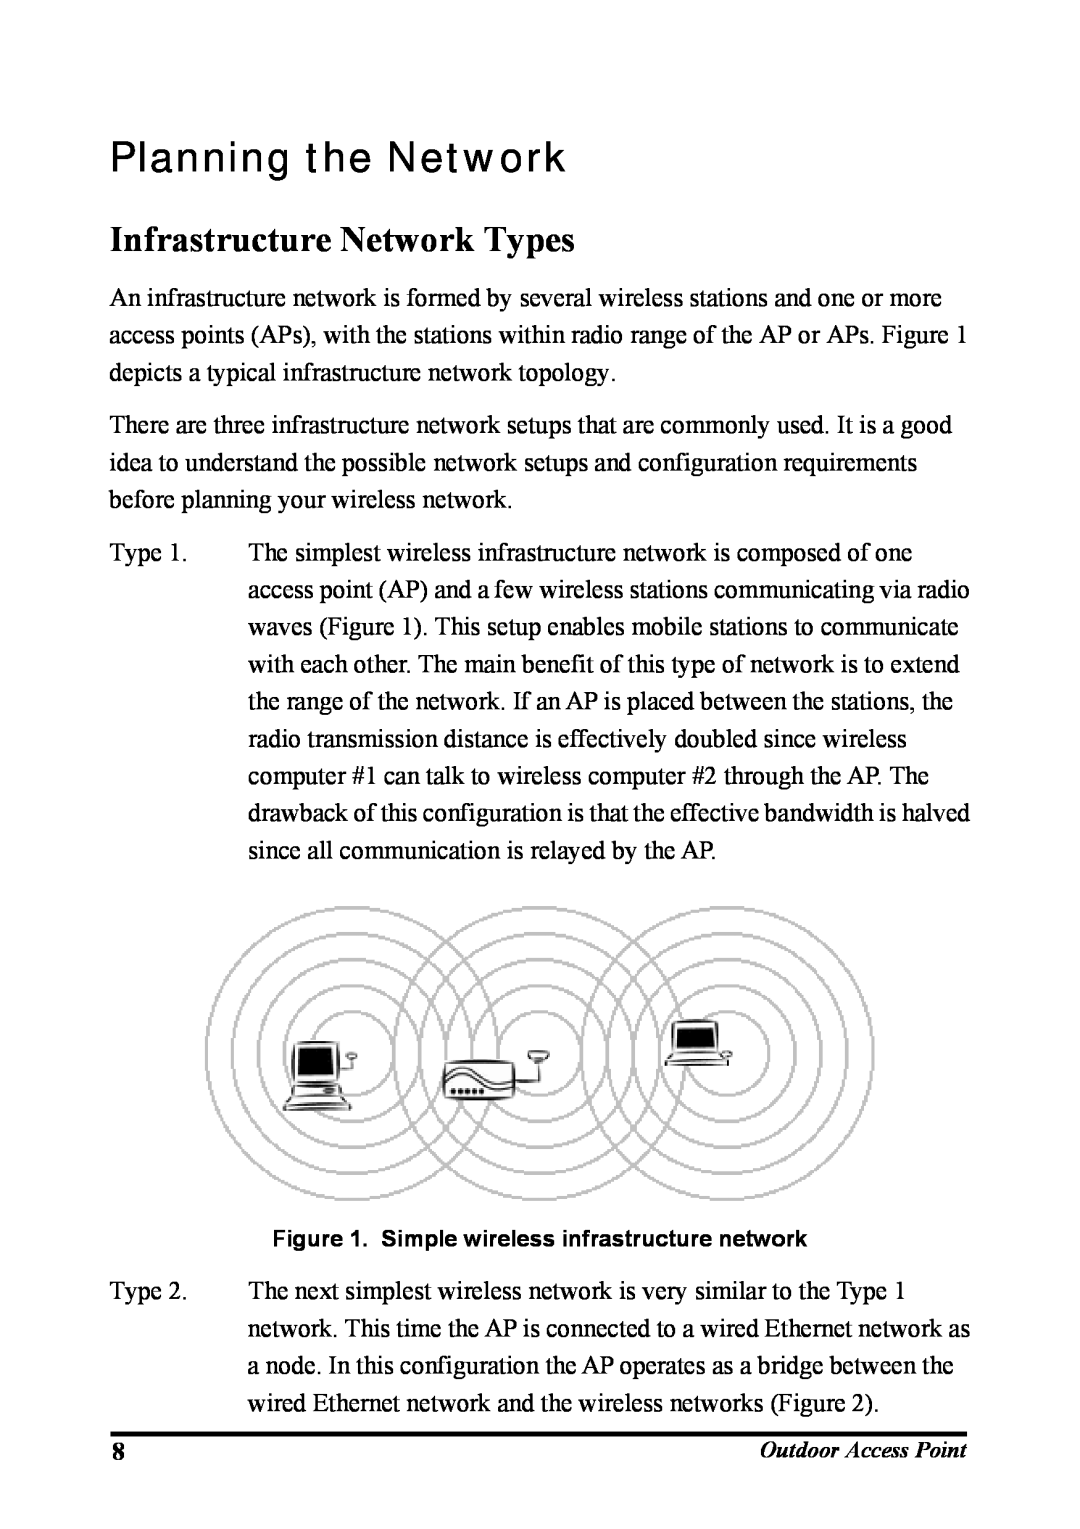 WHP Wireless WHP-1130, WHP-1120, WHP-1100 user manual Planning the Network, Infrastructure Network Types 